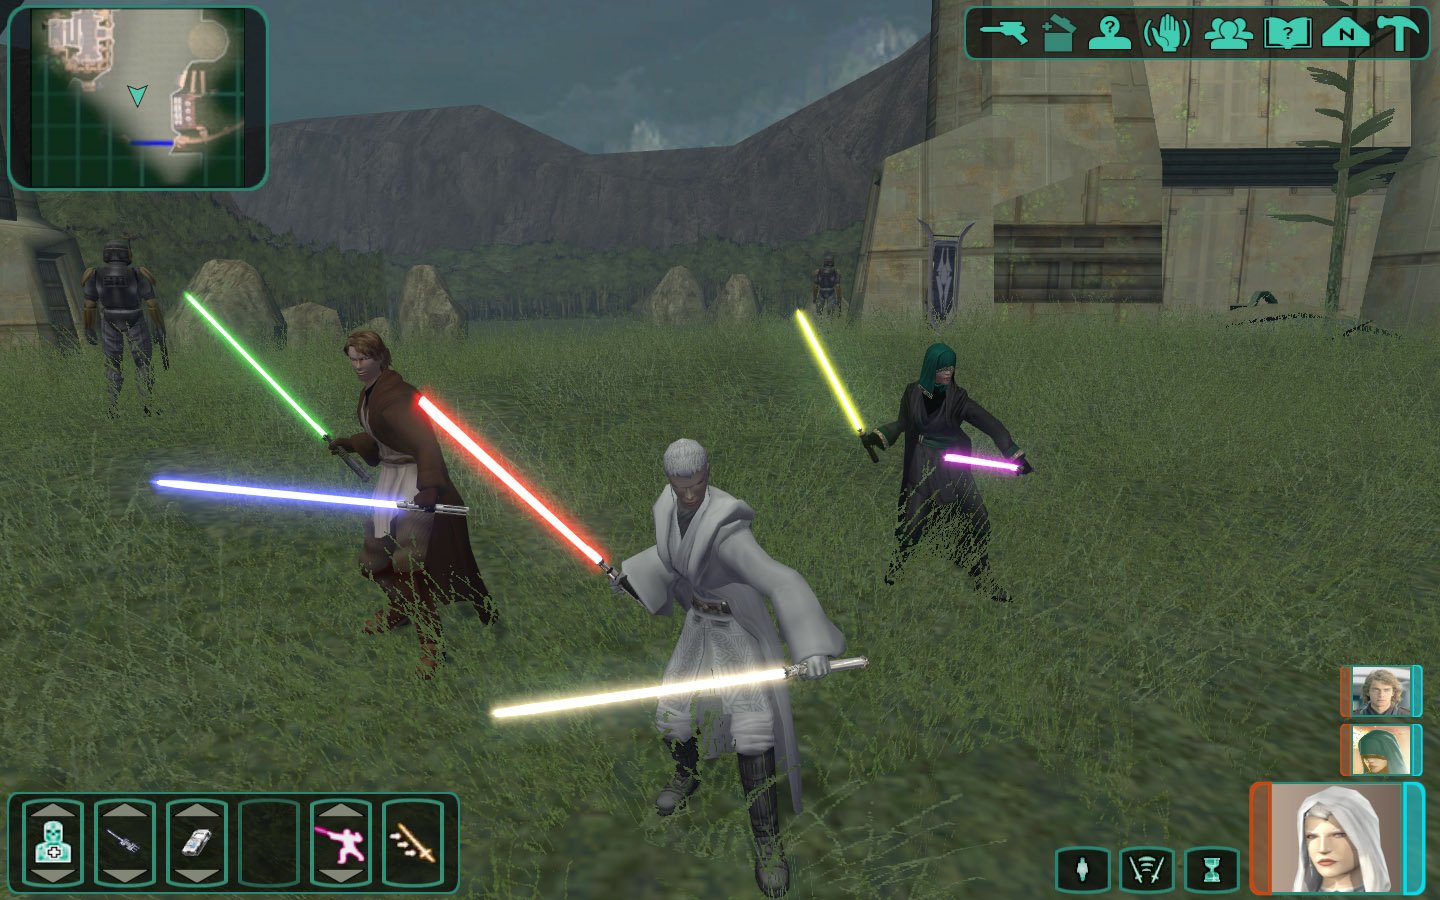 Скриншот 1 к игре Star Wars: Knights of the Old Republic II - The Sith Lords v.1.0b [GOG] (2004)